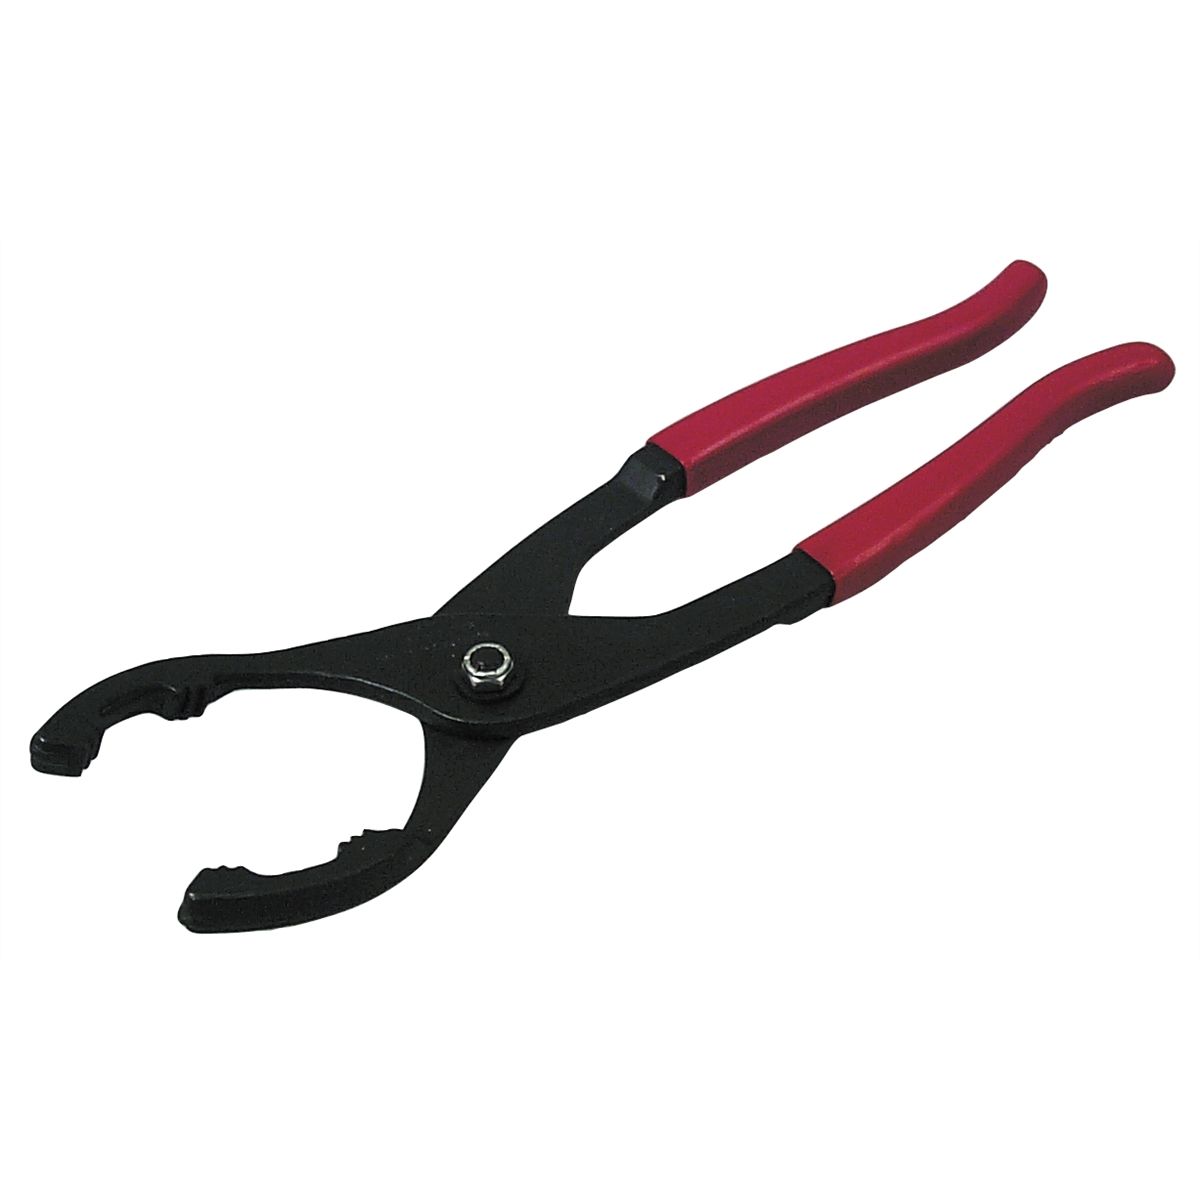 Oil Filter Pliers - 2-1/4 to 4 In - 20 Degree Angle